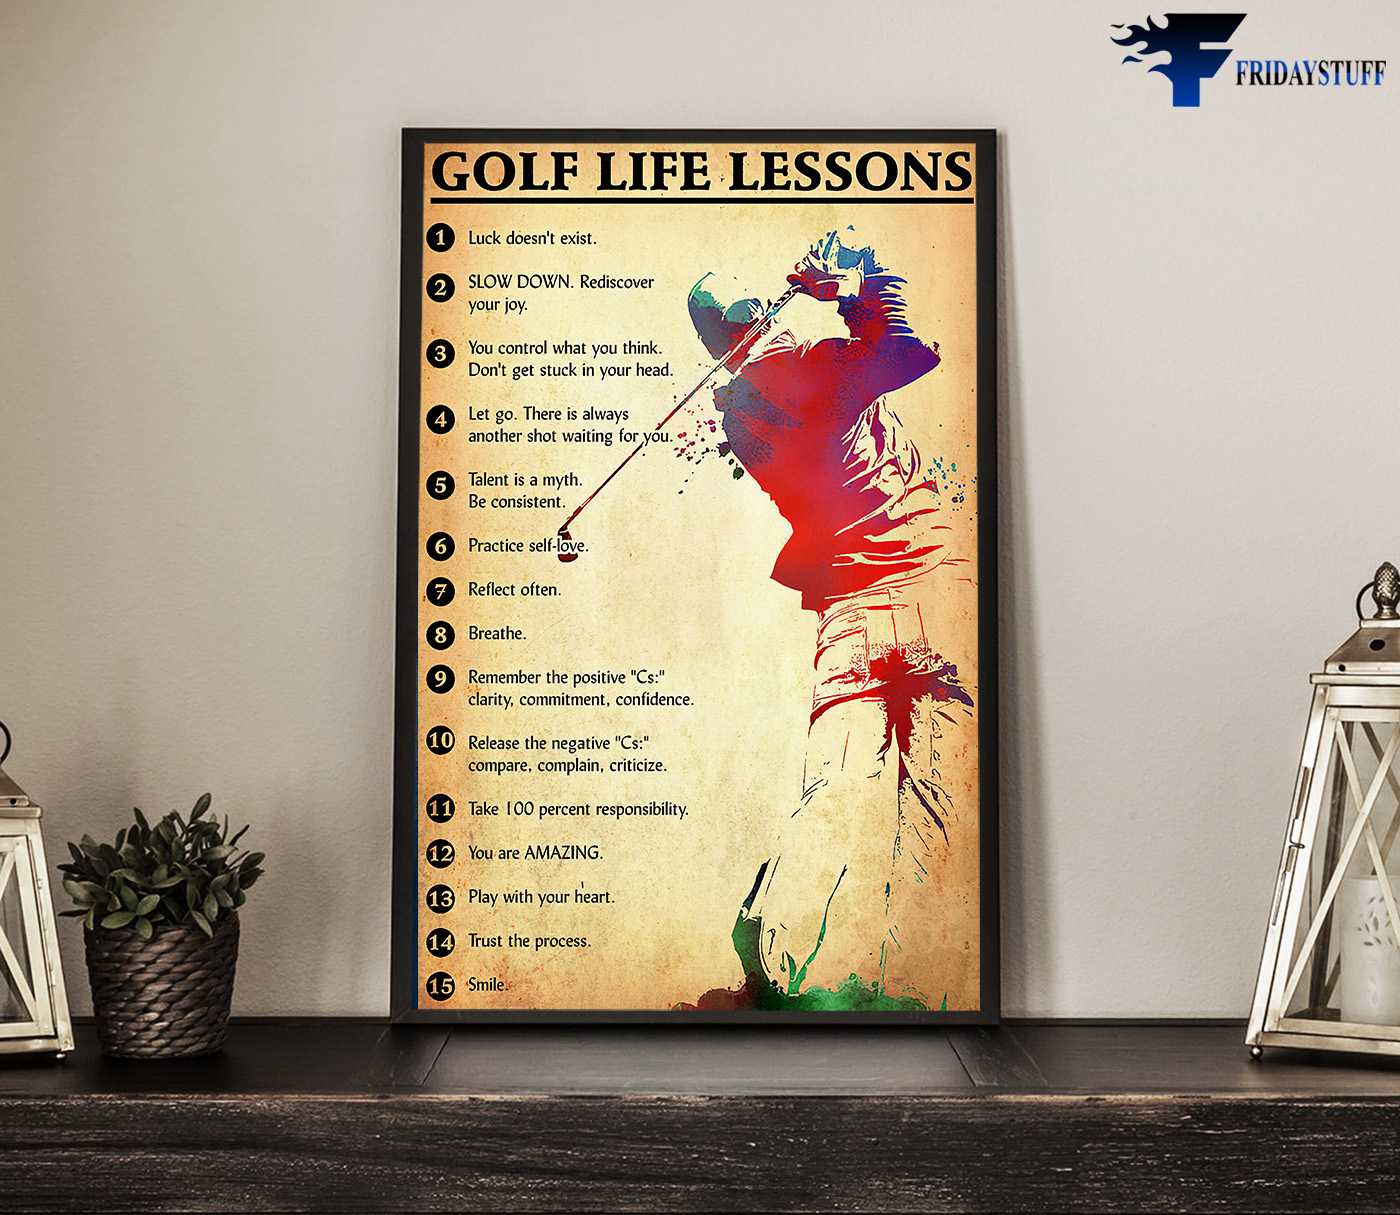 Golf Life Lessons, Golf Lover, Golf Player, Luck Doesn't Exist, Slow Down, Rediscover Your Joy, You Control What You Think, Don't Get Stuck In Your Head, Let Go, There Is Always, Another Shot Waiting For You